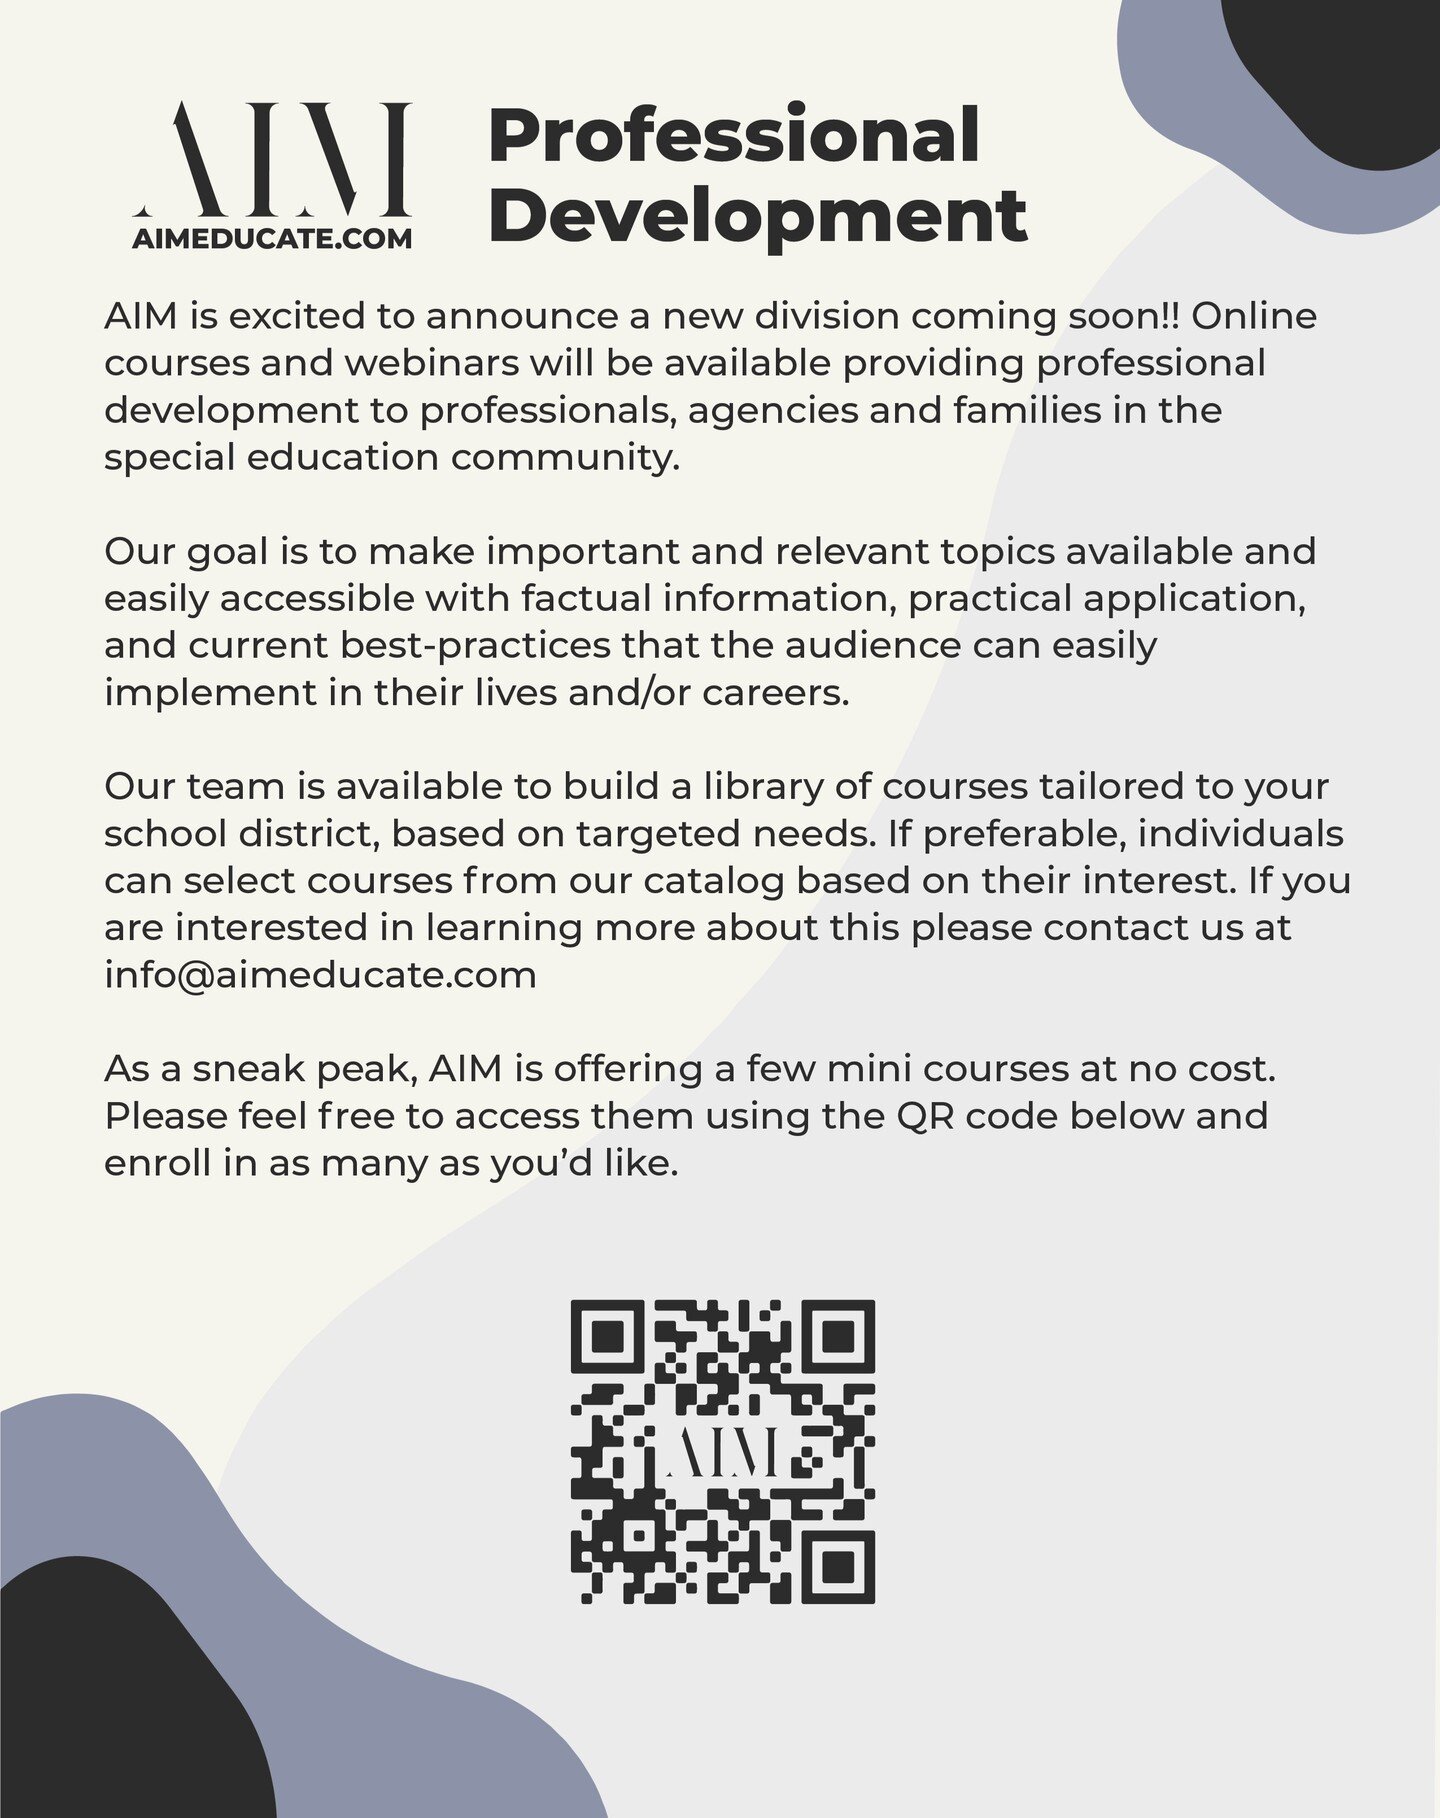 AIM is excited to announce a new division coming soon! These online courses make important and relevant topics available and easily accessible with factual information, practical application, and current best-practices that can be implemented into th